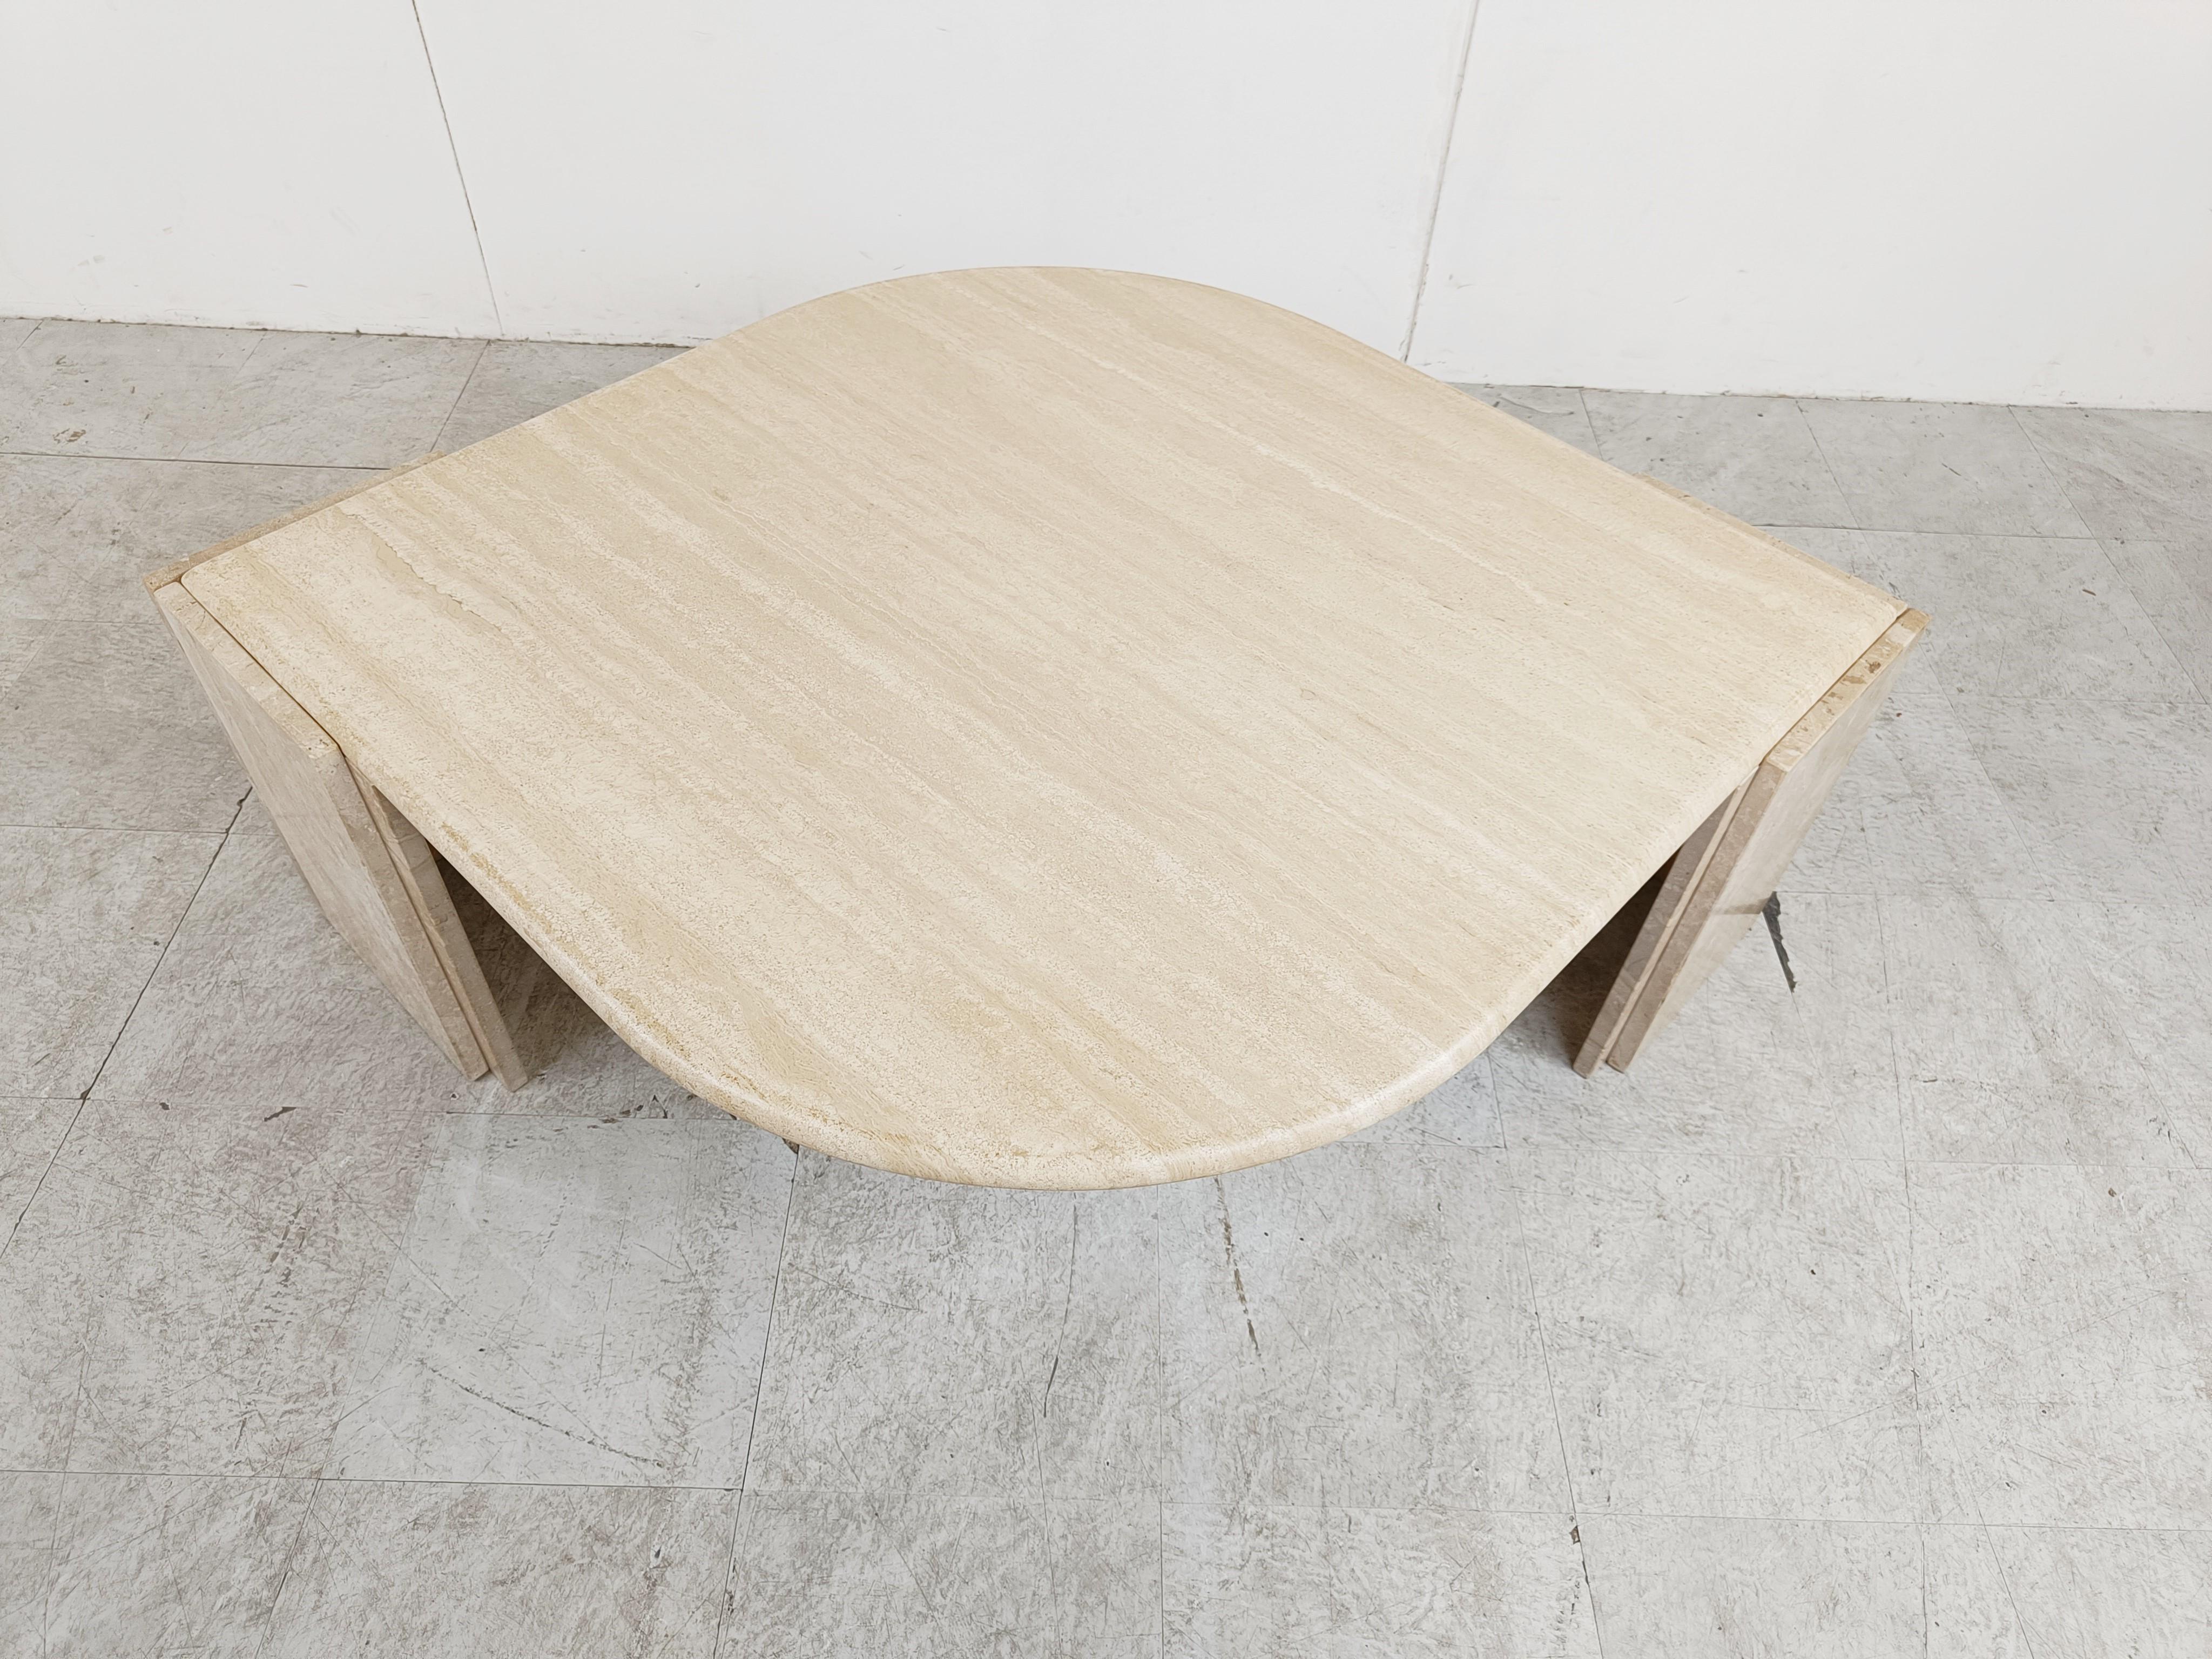 Gorgeous travertine 'eye' shaped coffee table by Roche Bobois.

These tables have been popular thanks to their curved and timeless design.

Good condition

1970s - France

Height: 41cm/16.14